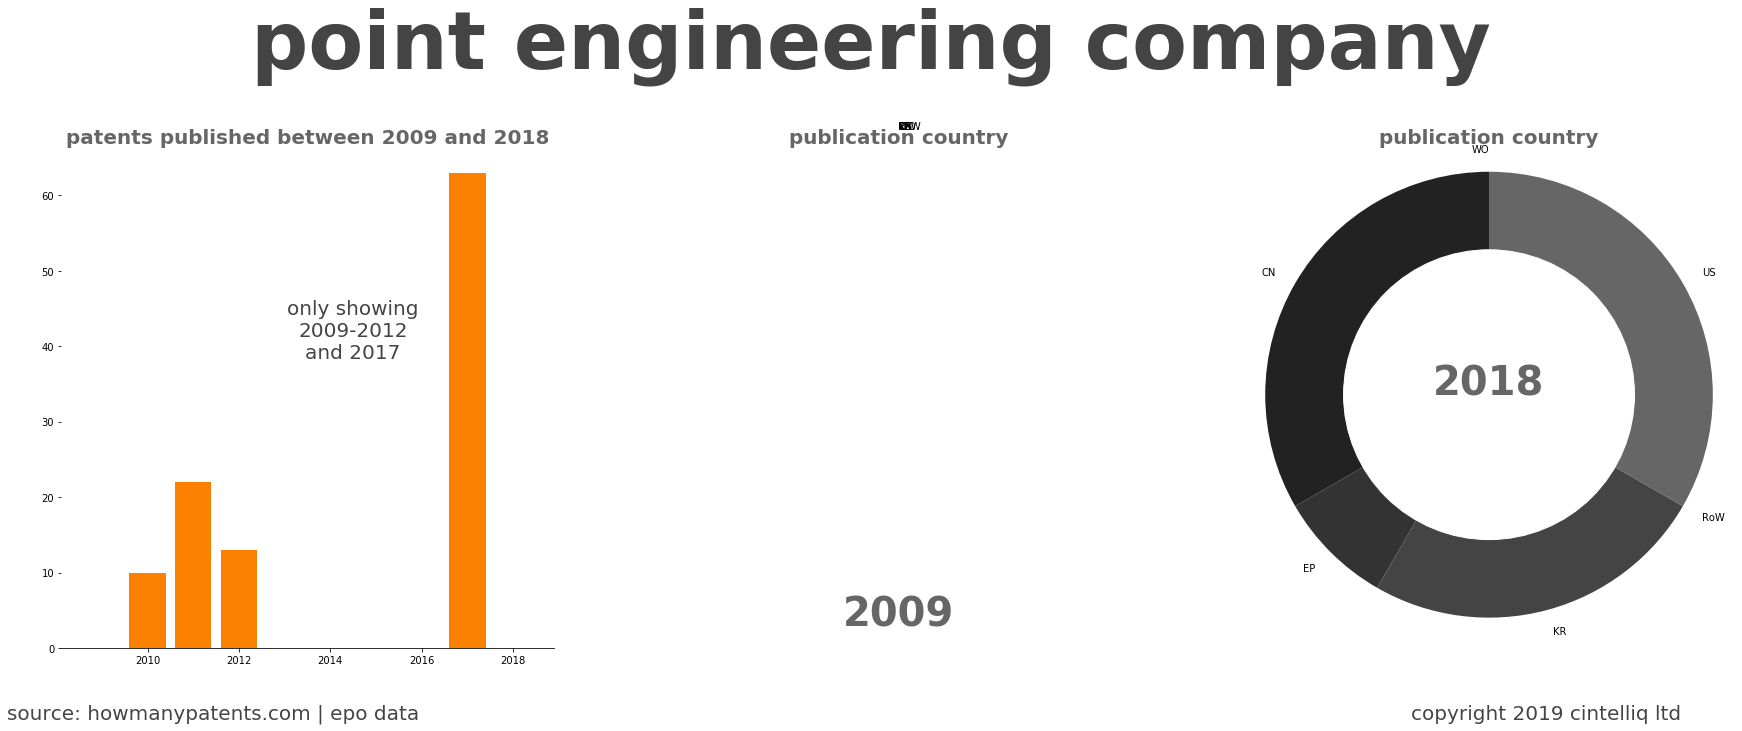 summary of patents for Point Engineering Company